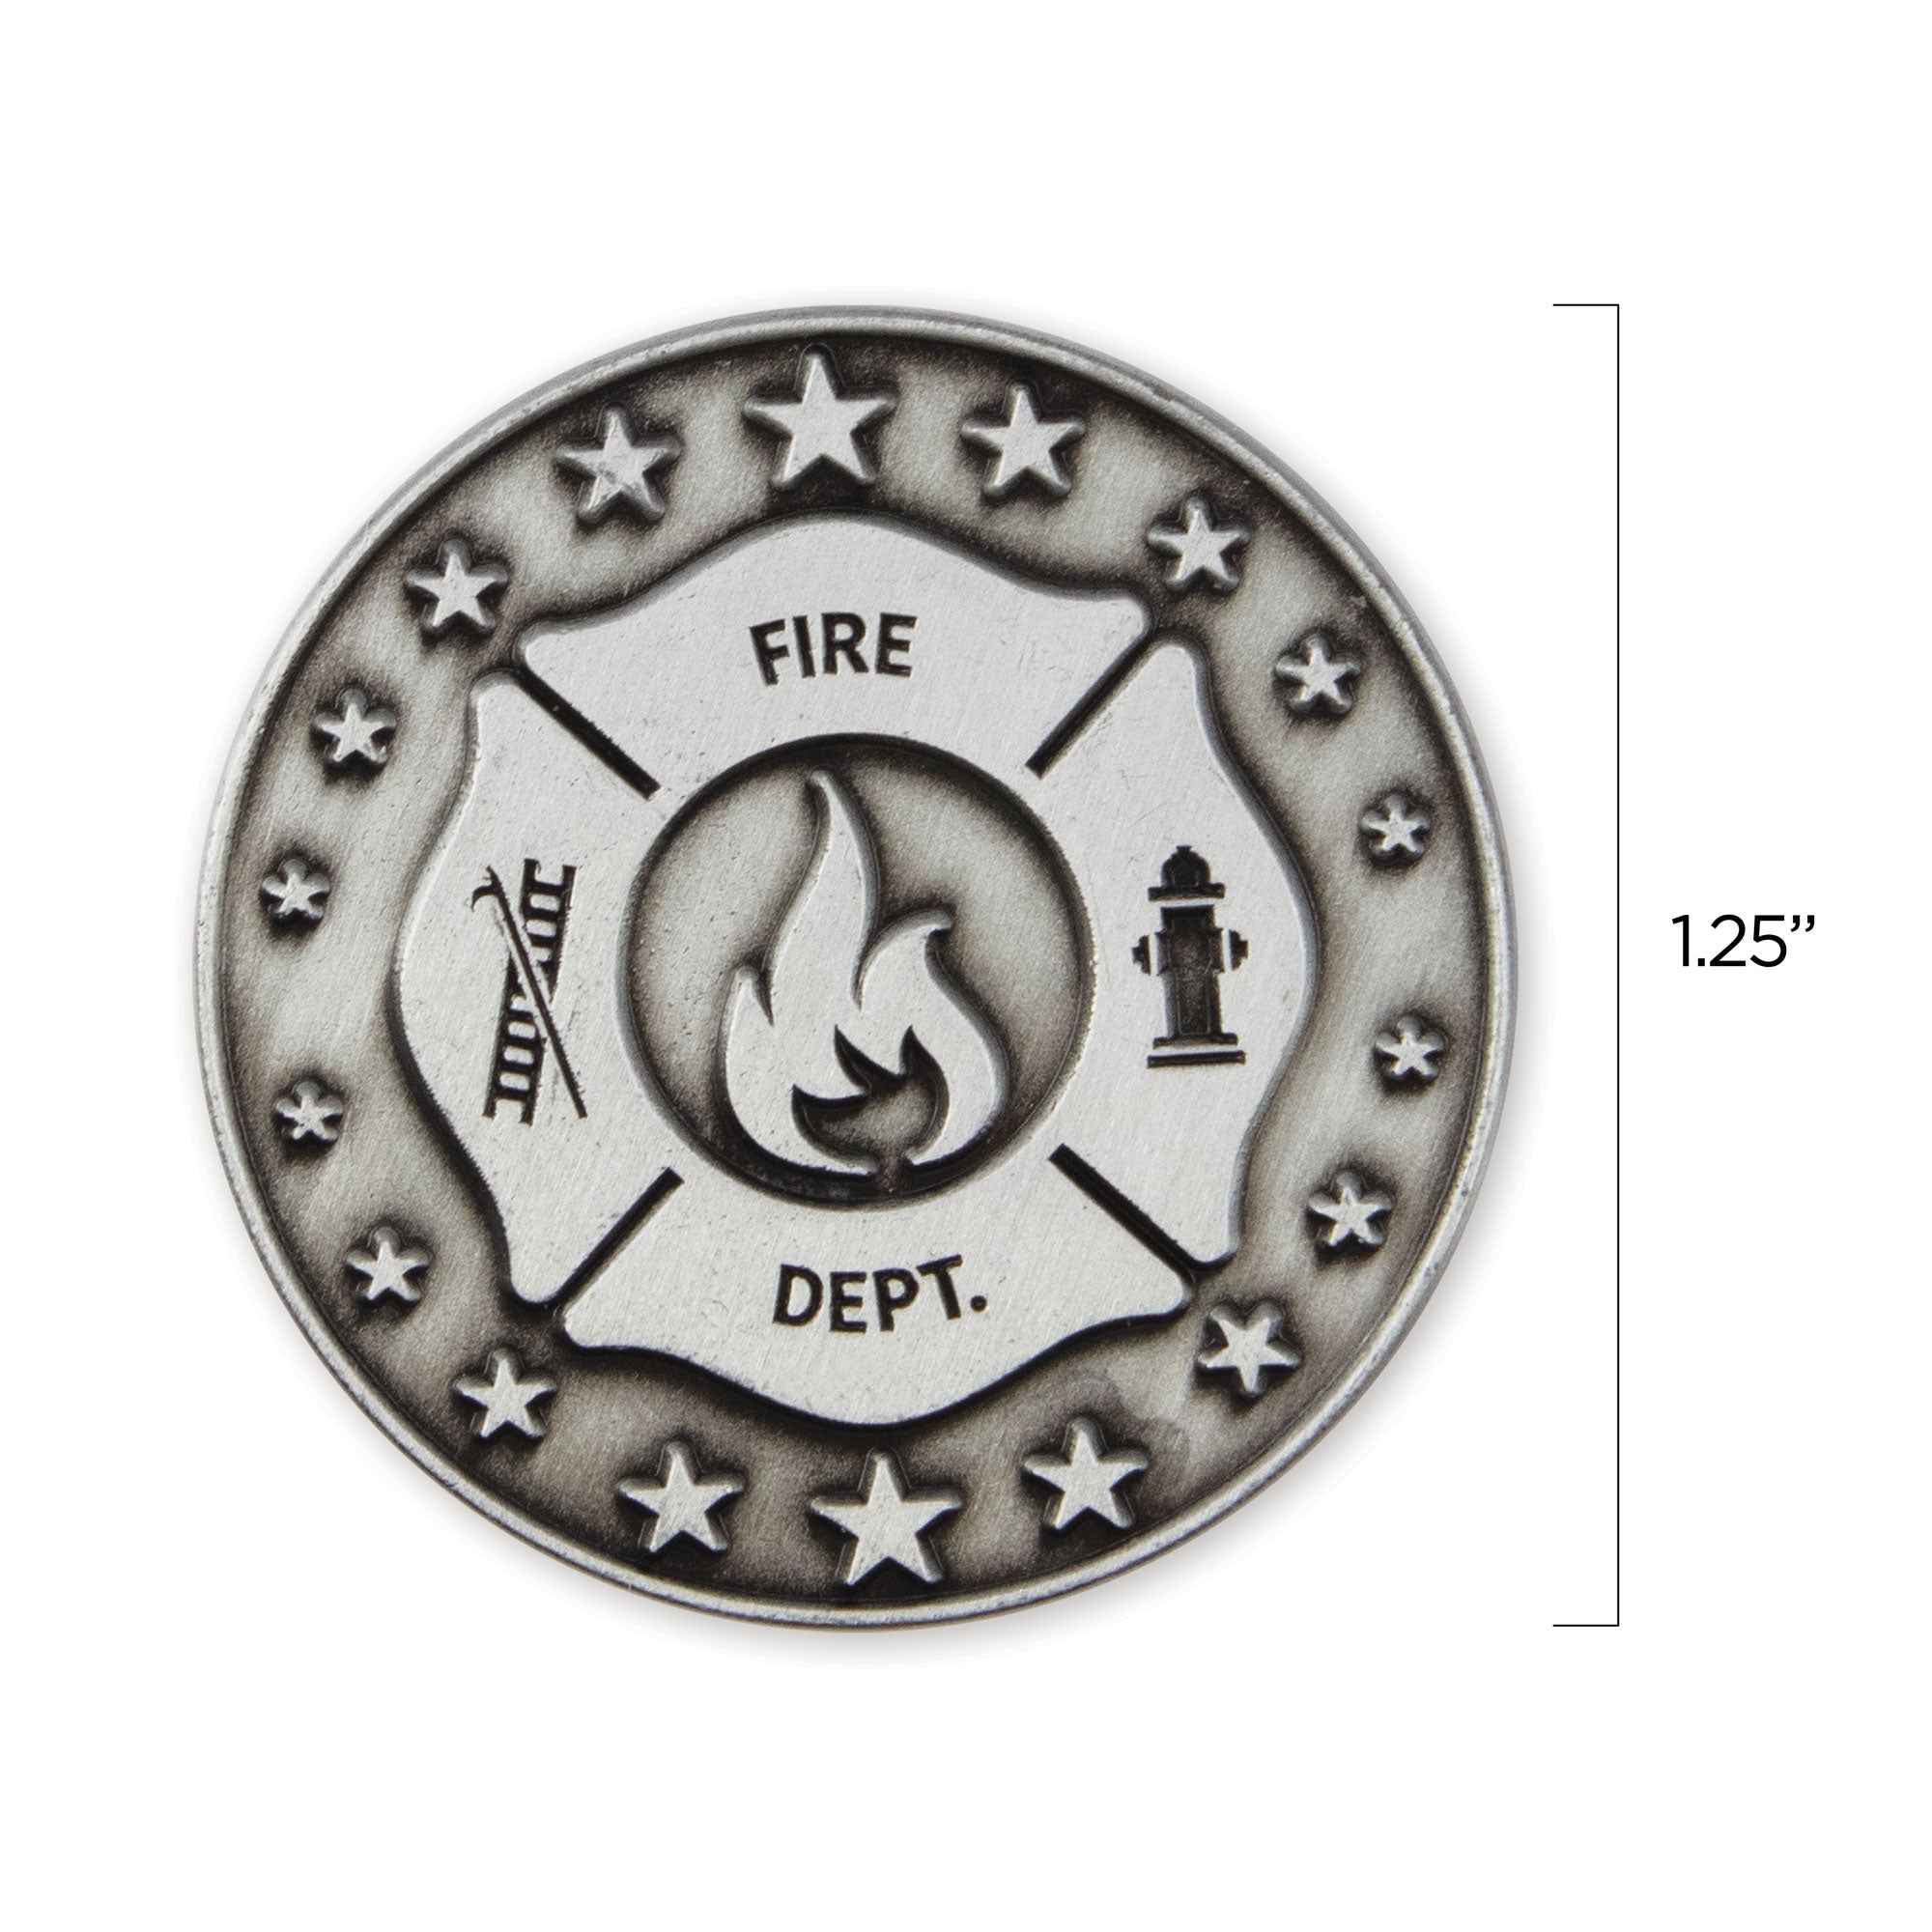 Firefighters Love Expression Coin